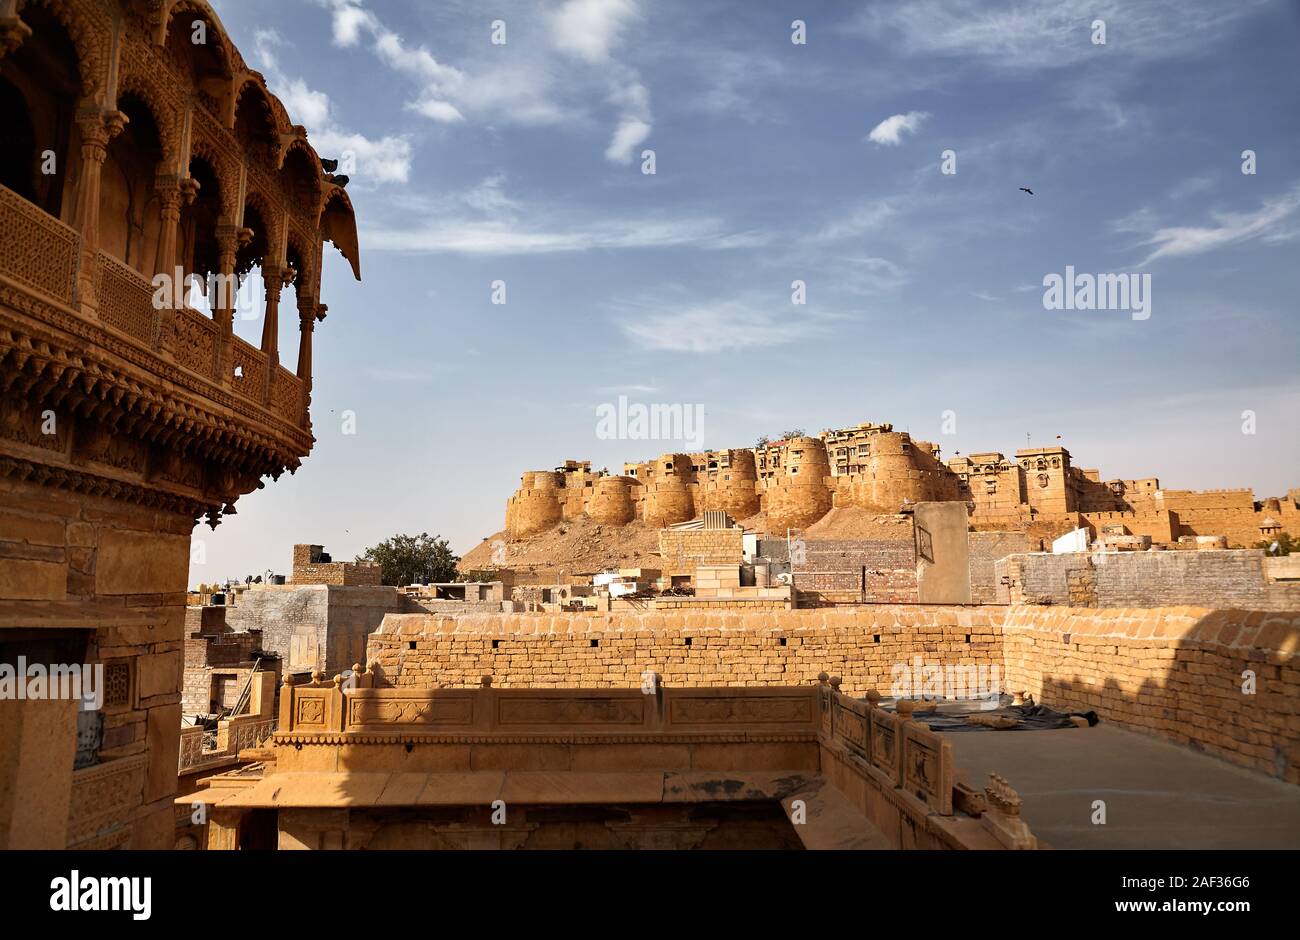 Panorama of desert city and Jaisalmer fort from the roof of city palace in Rajasthan, India Stock Photo